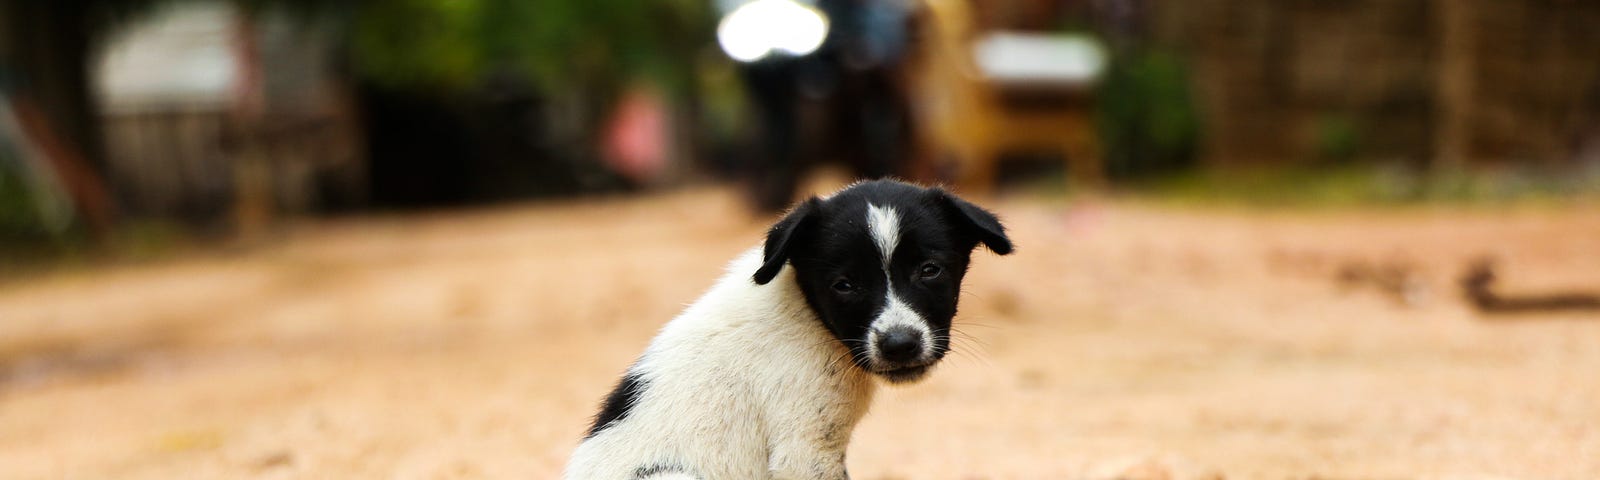 A photo of a small black and white puppy sitting alone and abandoned on a dirt road.